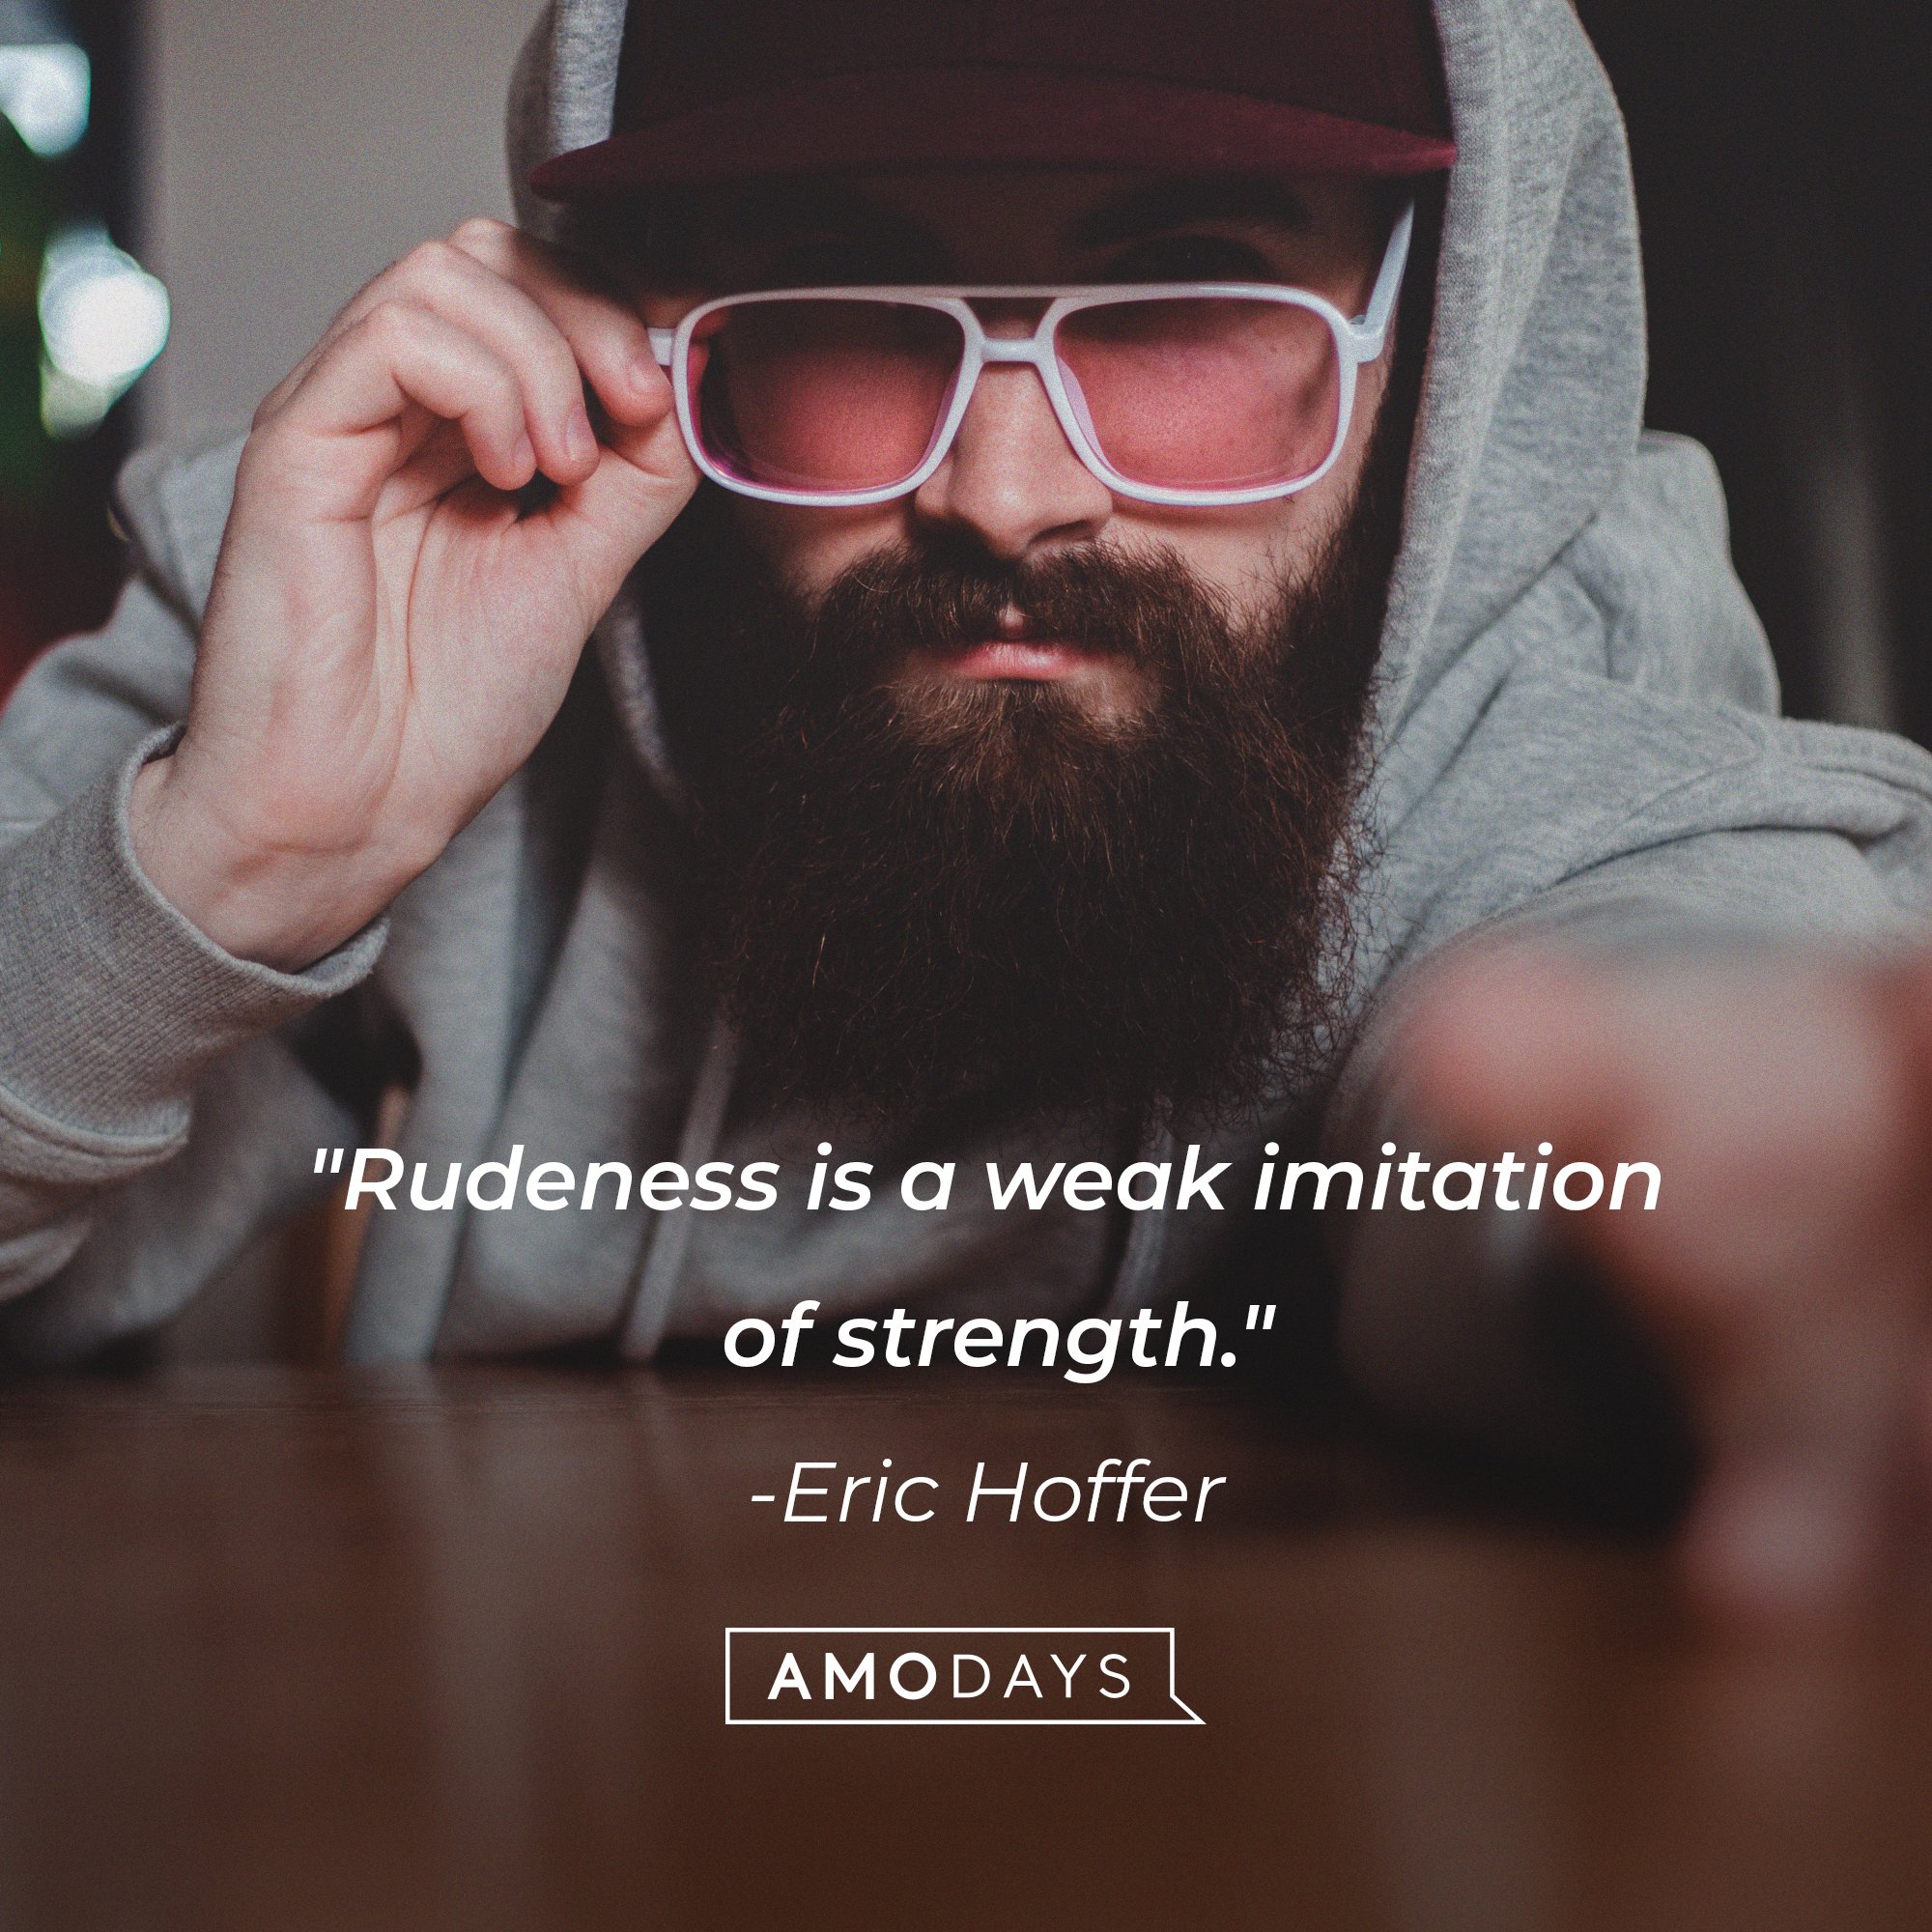 Eric Hoffer’s quote: "Rudeness is a weak imitation of strength." | Image: AmoDays